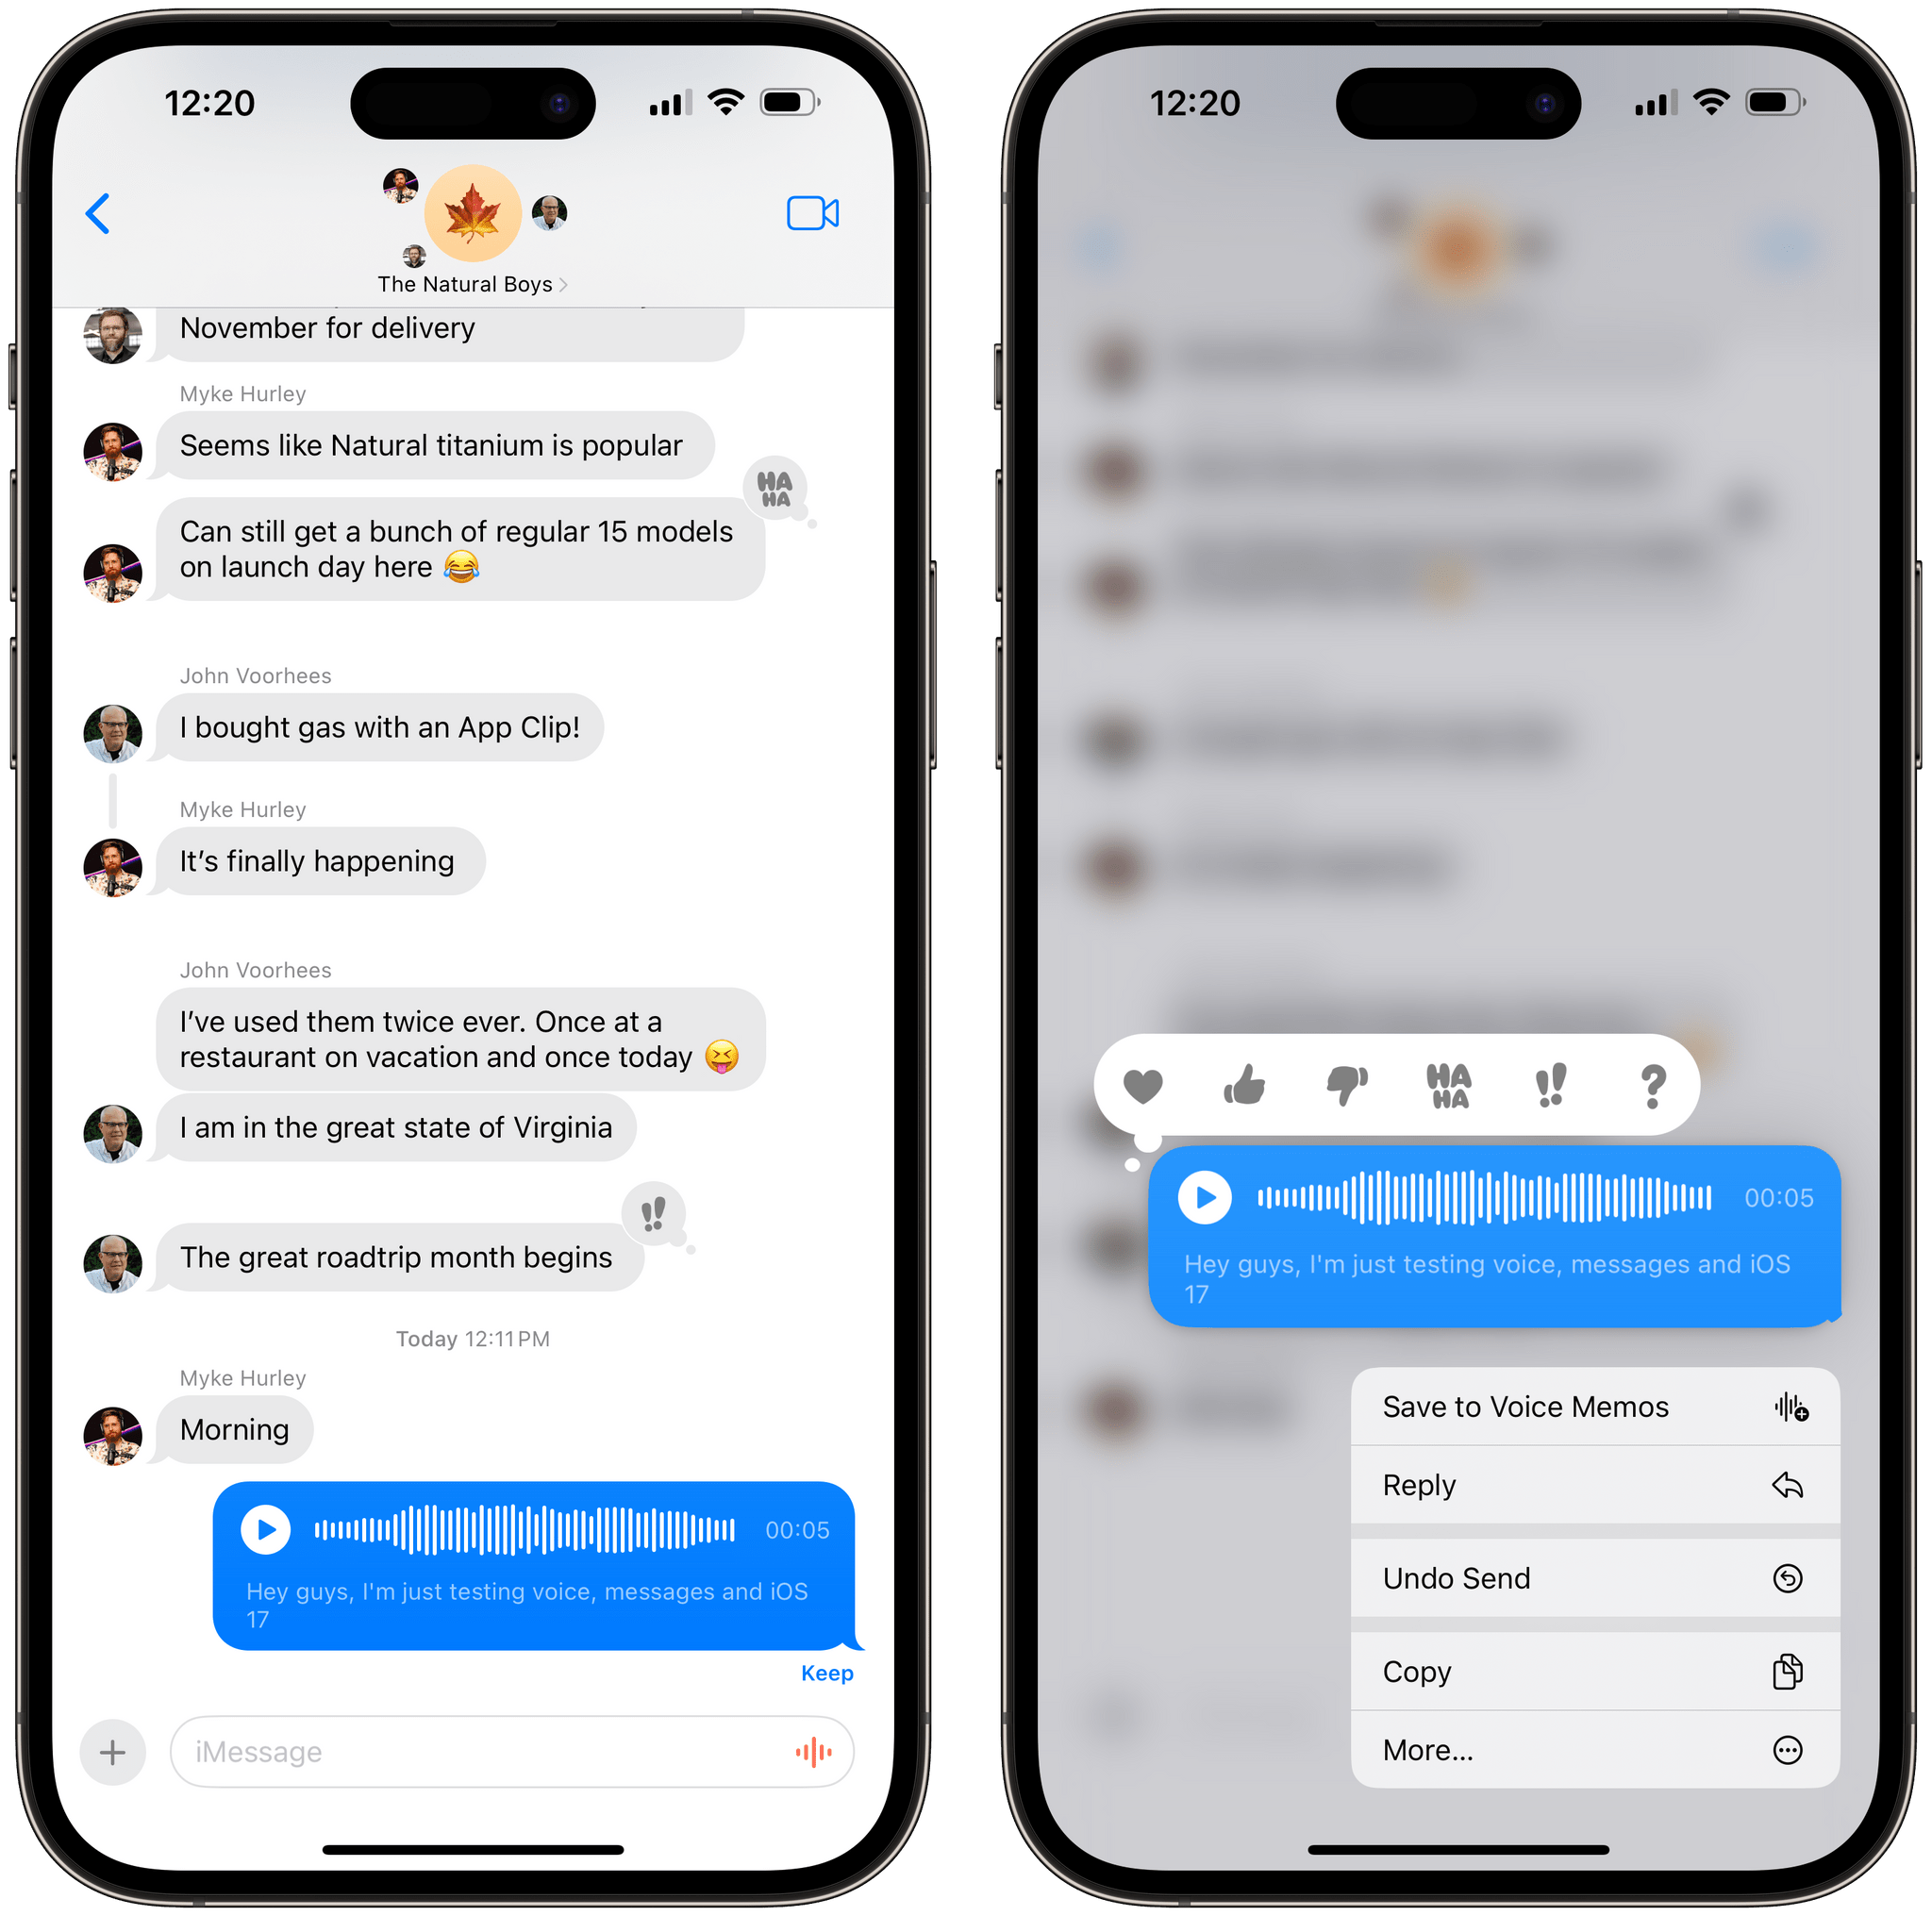 Voice messages get transcribed and you can save them to the Voice Memos app.